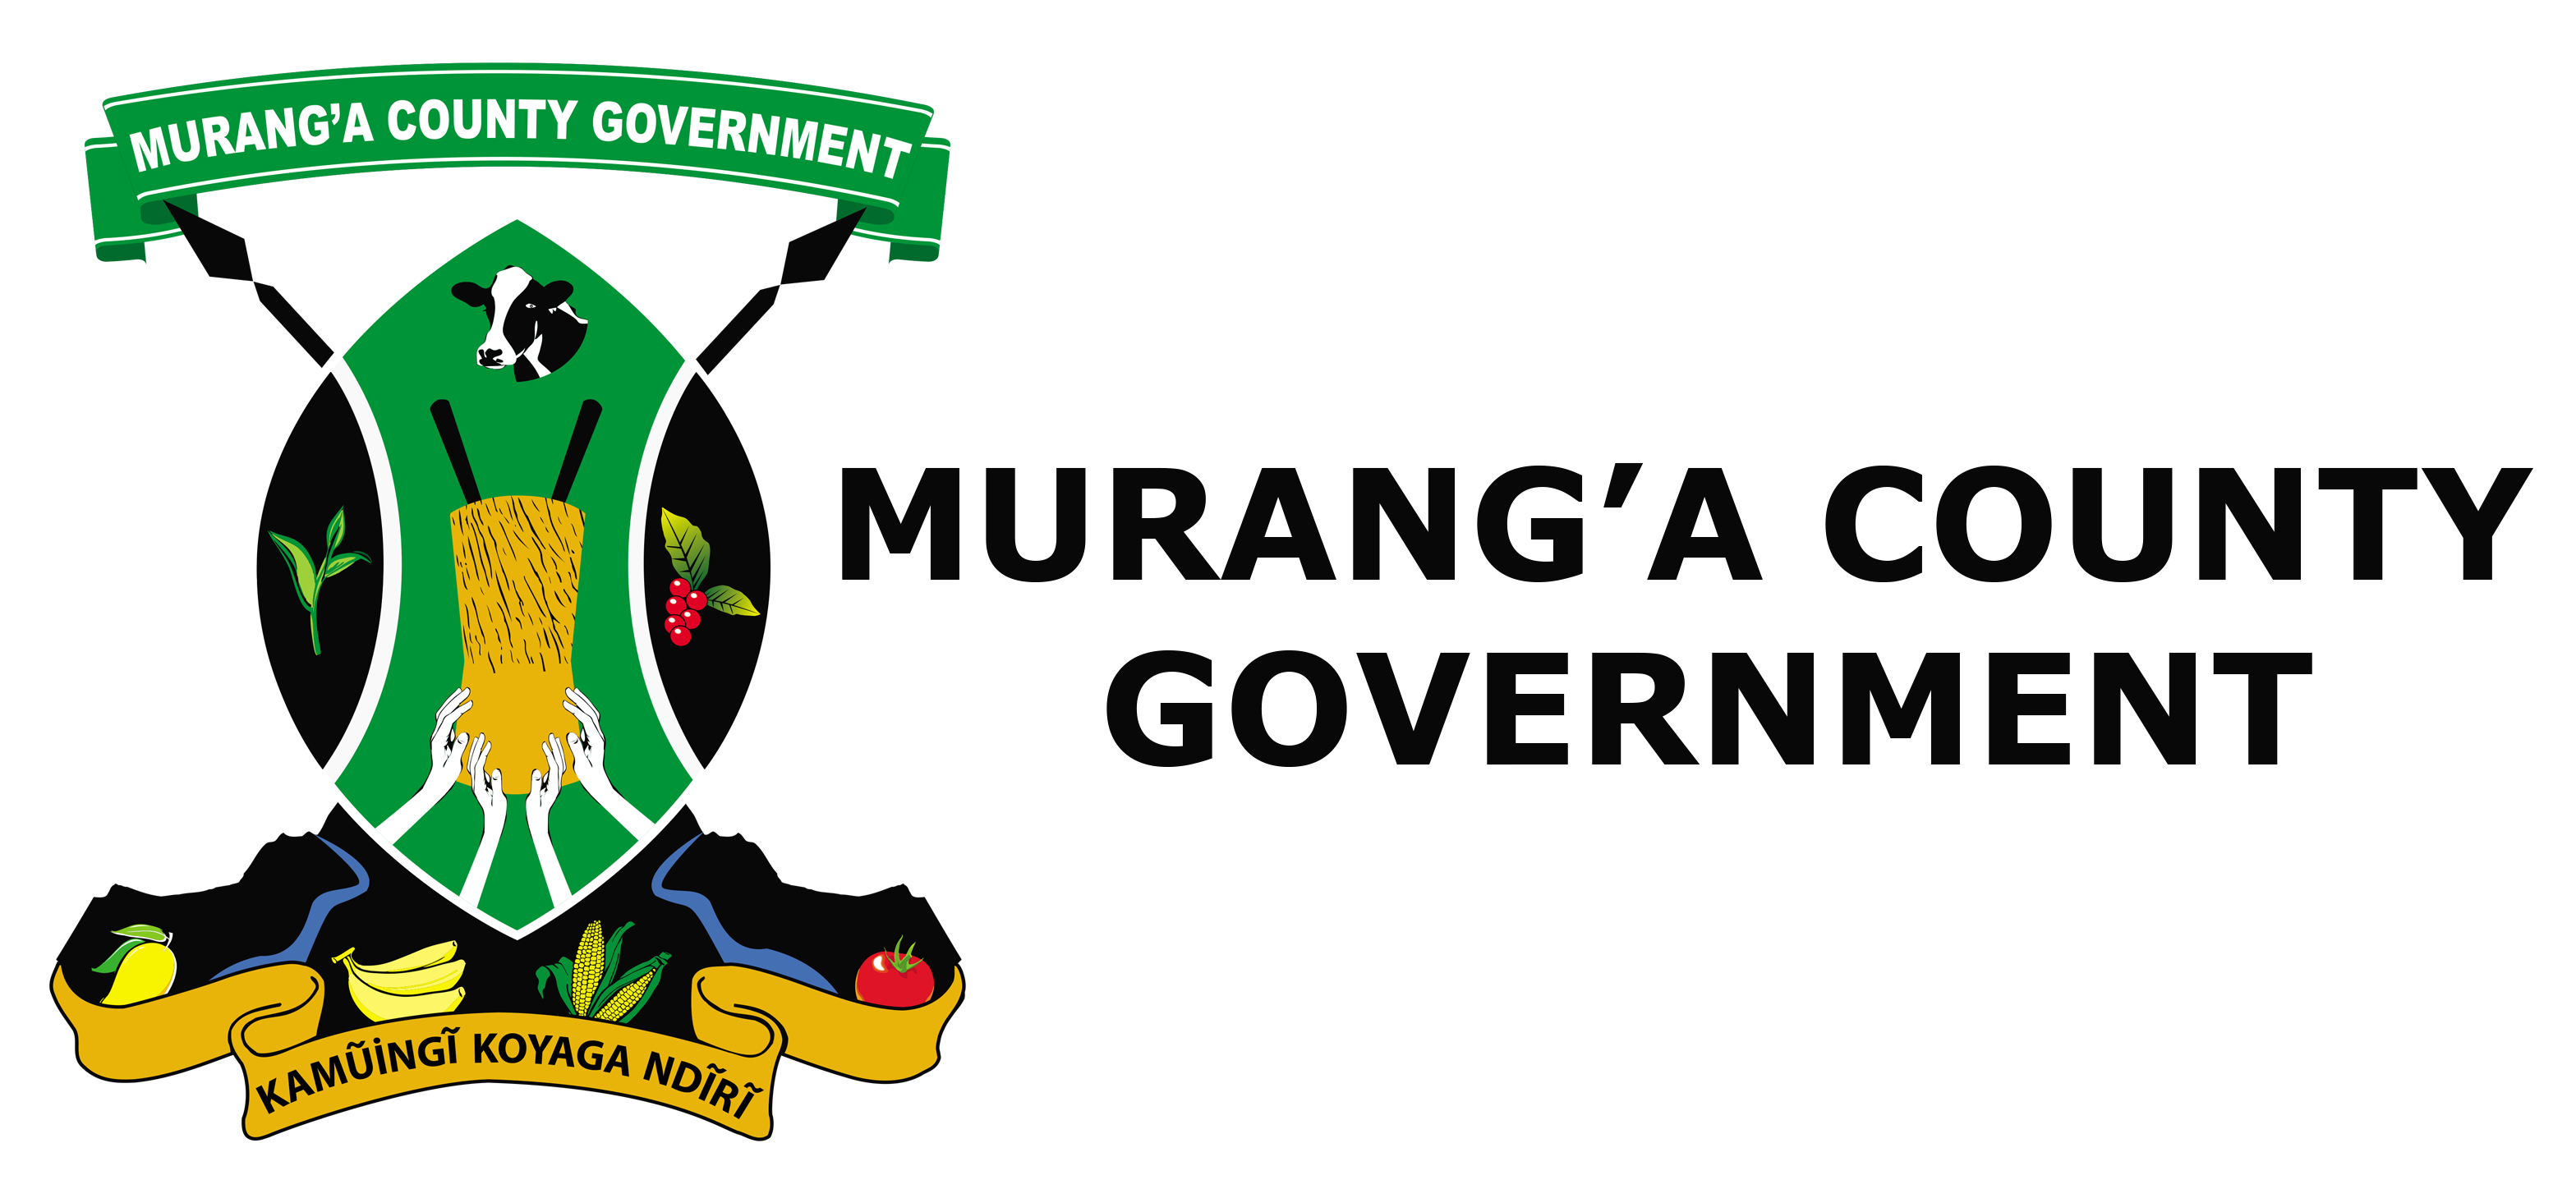 List Of Murang'a County Government Ministers